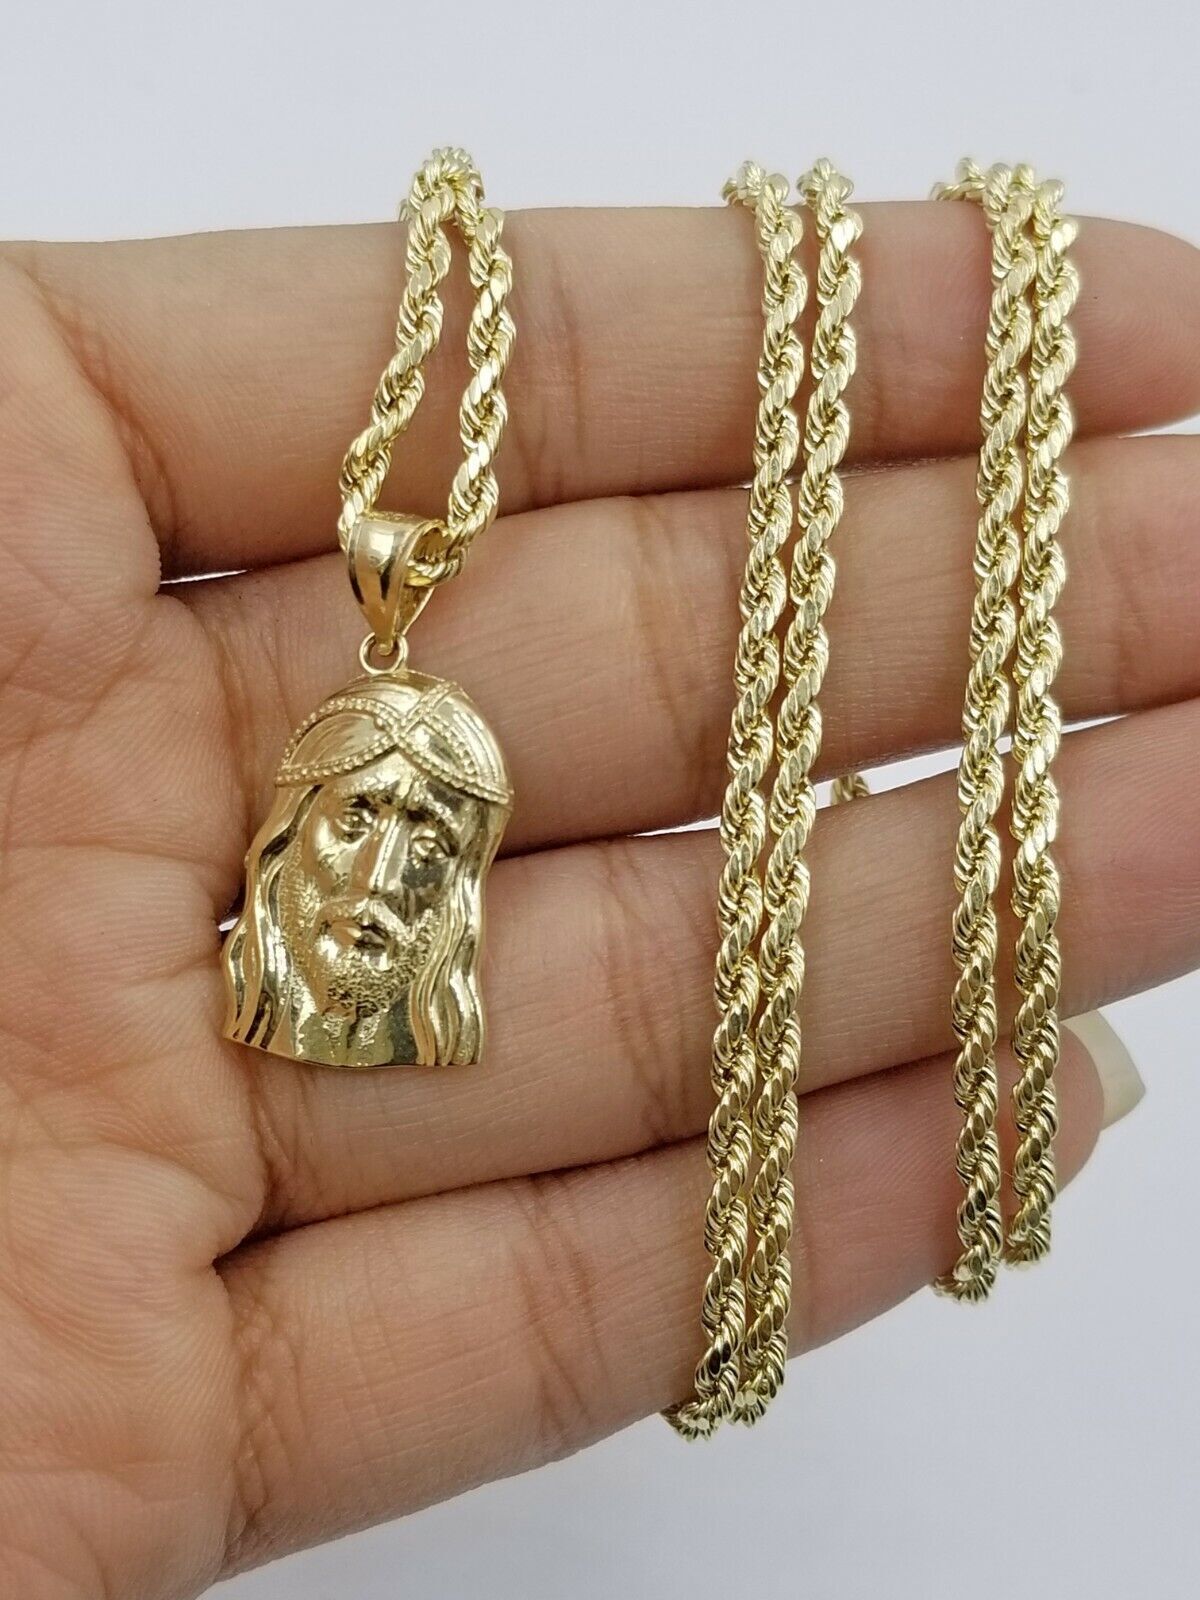 REAL 10k Rope Chain And Jesus head face Charm Pendant 3mm Necklace Set 16"-28"